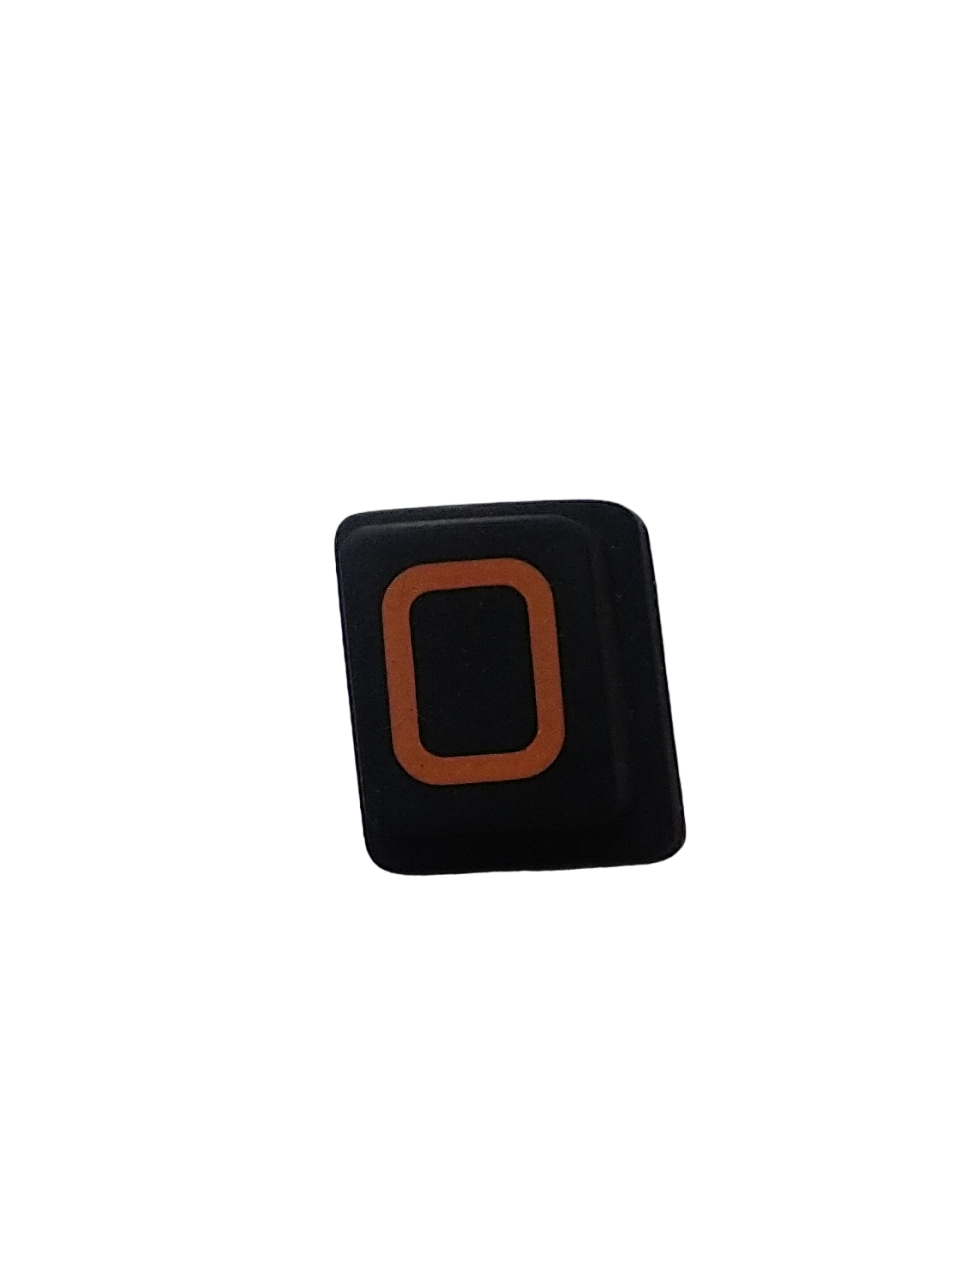 Inmotion V12 Button Cover